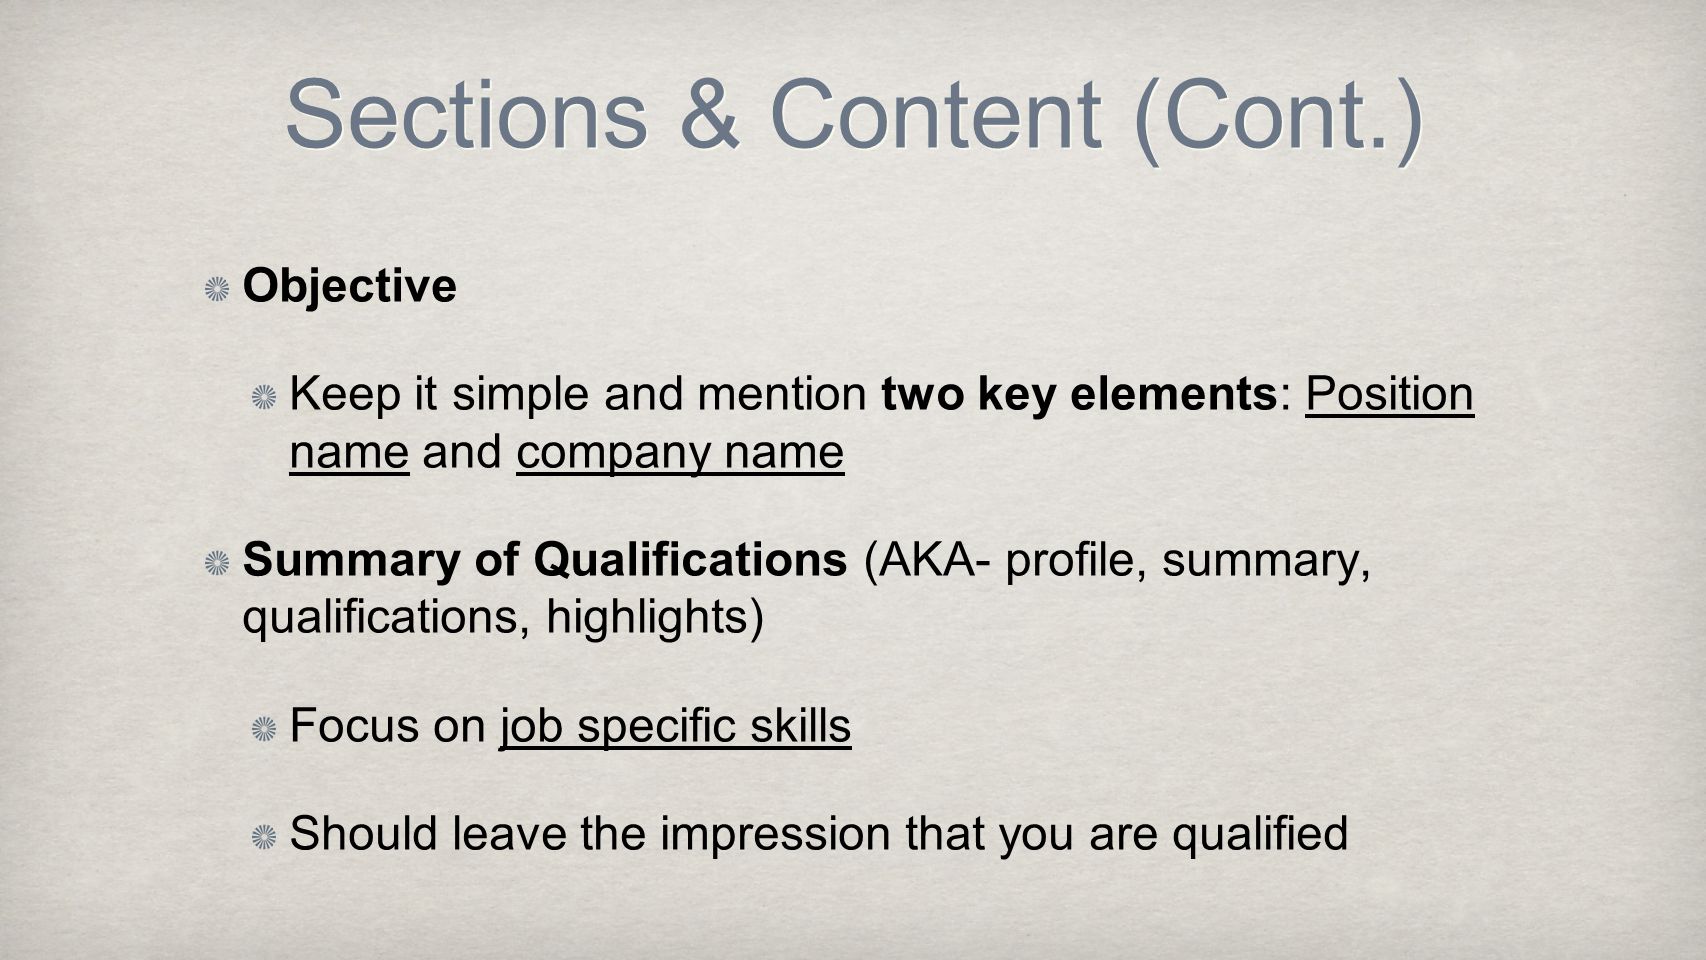 Sections & Content (Cont.) Objective Keep it simple and mention two key elements: Position name and company name Summary of Qualifications (AKA- profile, summary, qualifications, highlights) Focus on job specific skills Should leave the impression that you are qualified